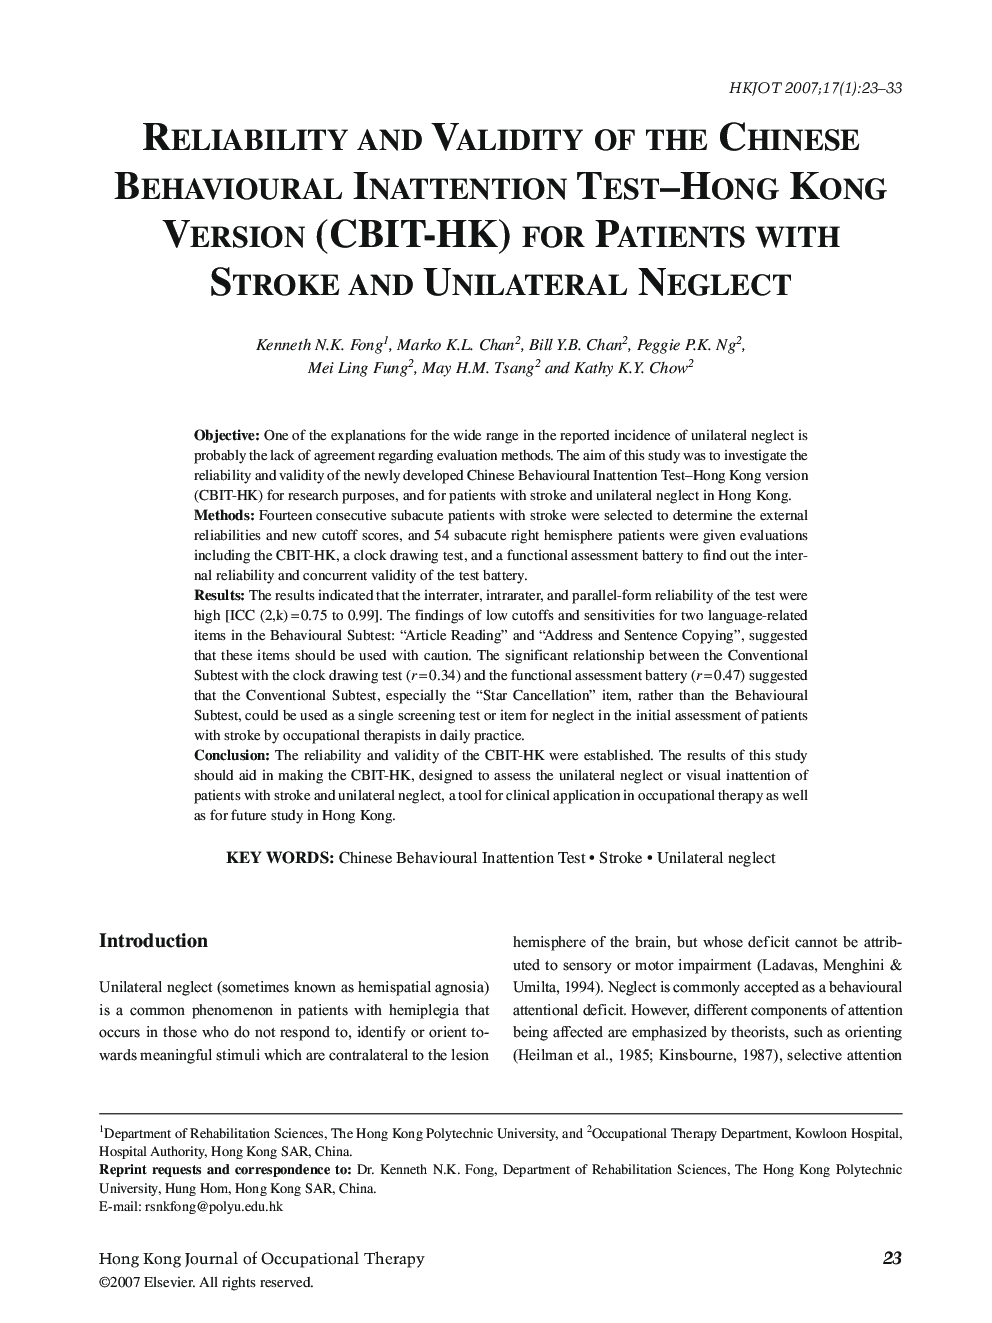 Reliability and Validity of the Chinese Behavioural Inattention Test–Hong Kong Version (CBIT-HK) for Patients with Stroke and Unilateral Neglect